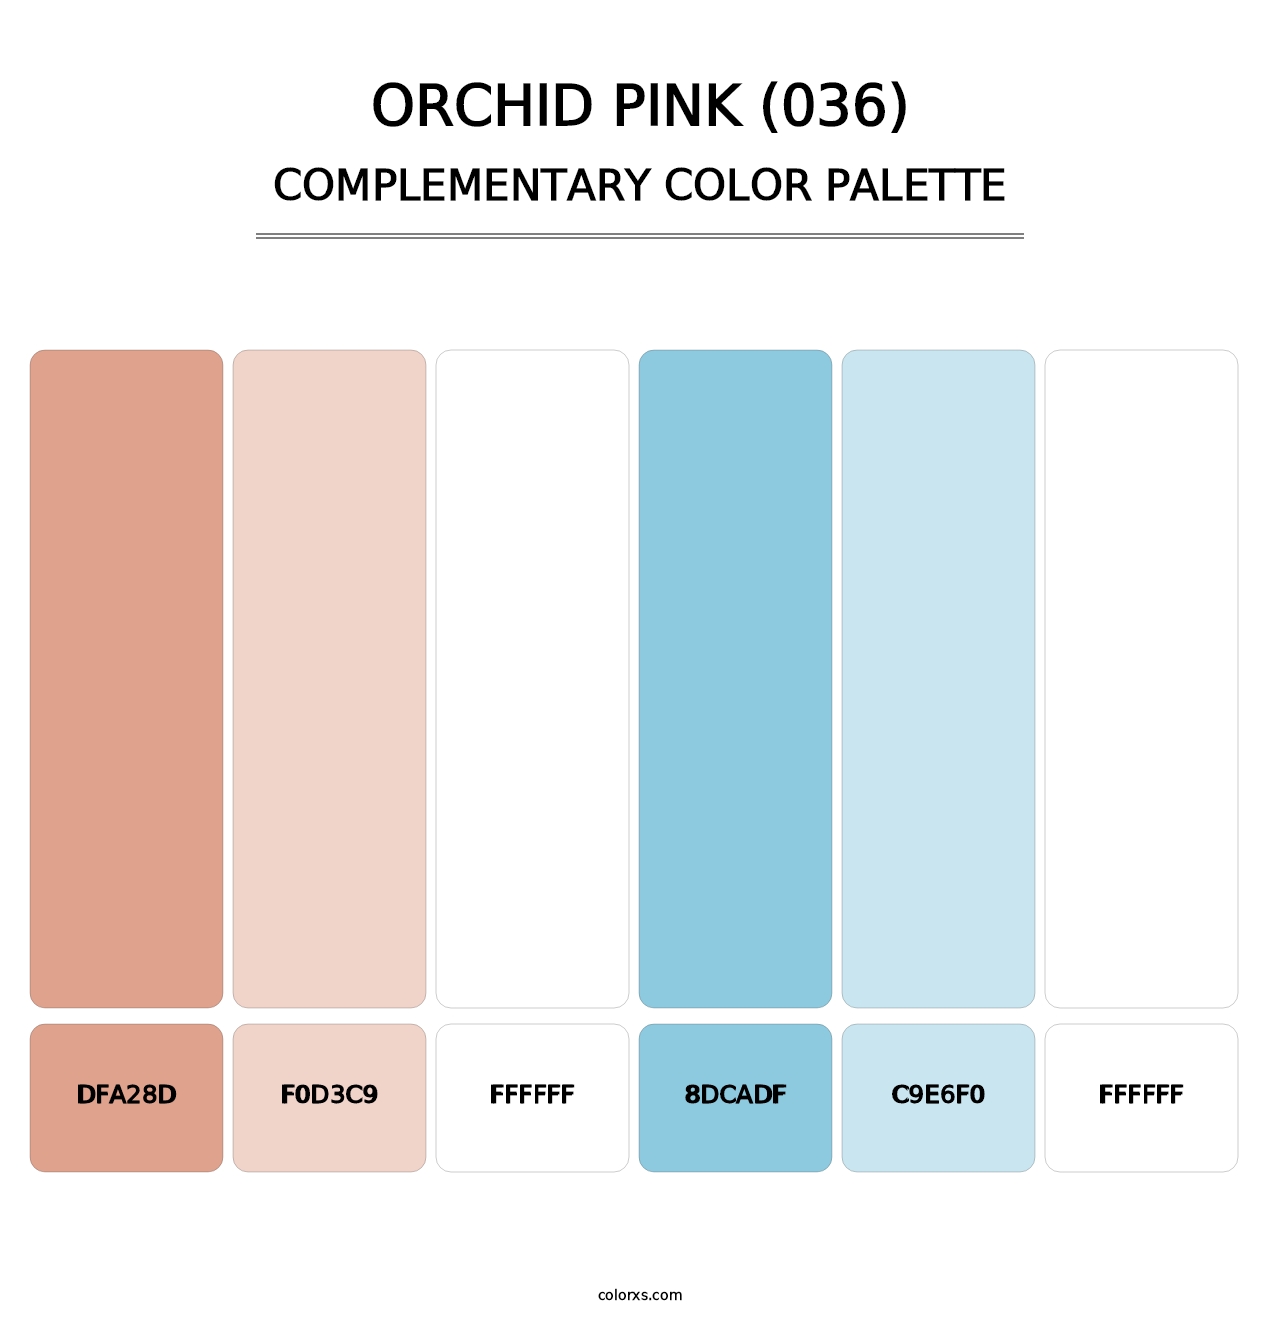 Orchid Pink (036) - Complementary Color Palette